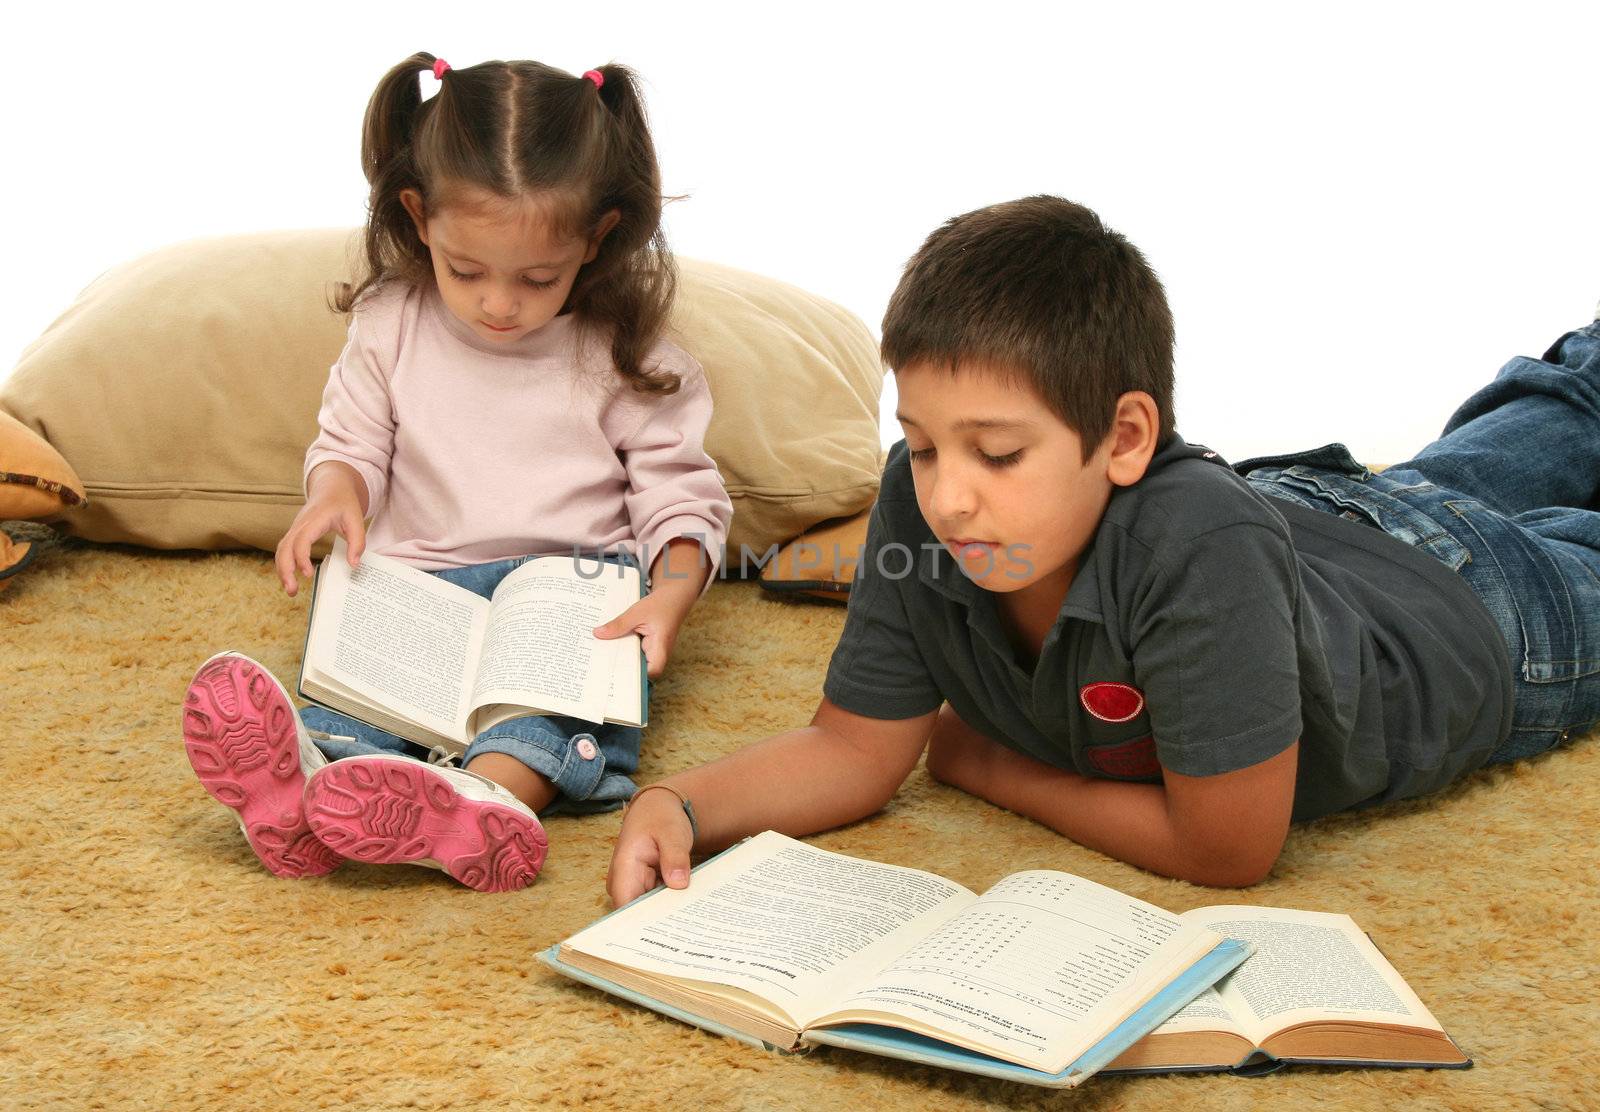 Brother and sister reading books over a carpet. They look interested and concentrated. 
